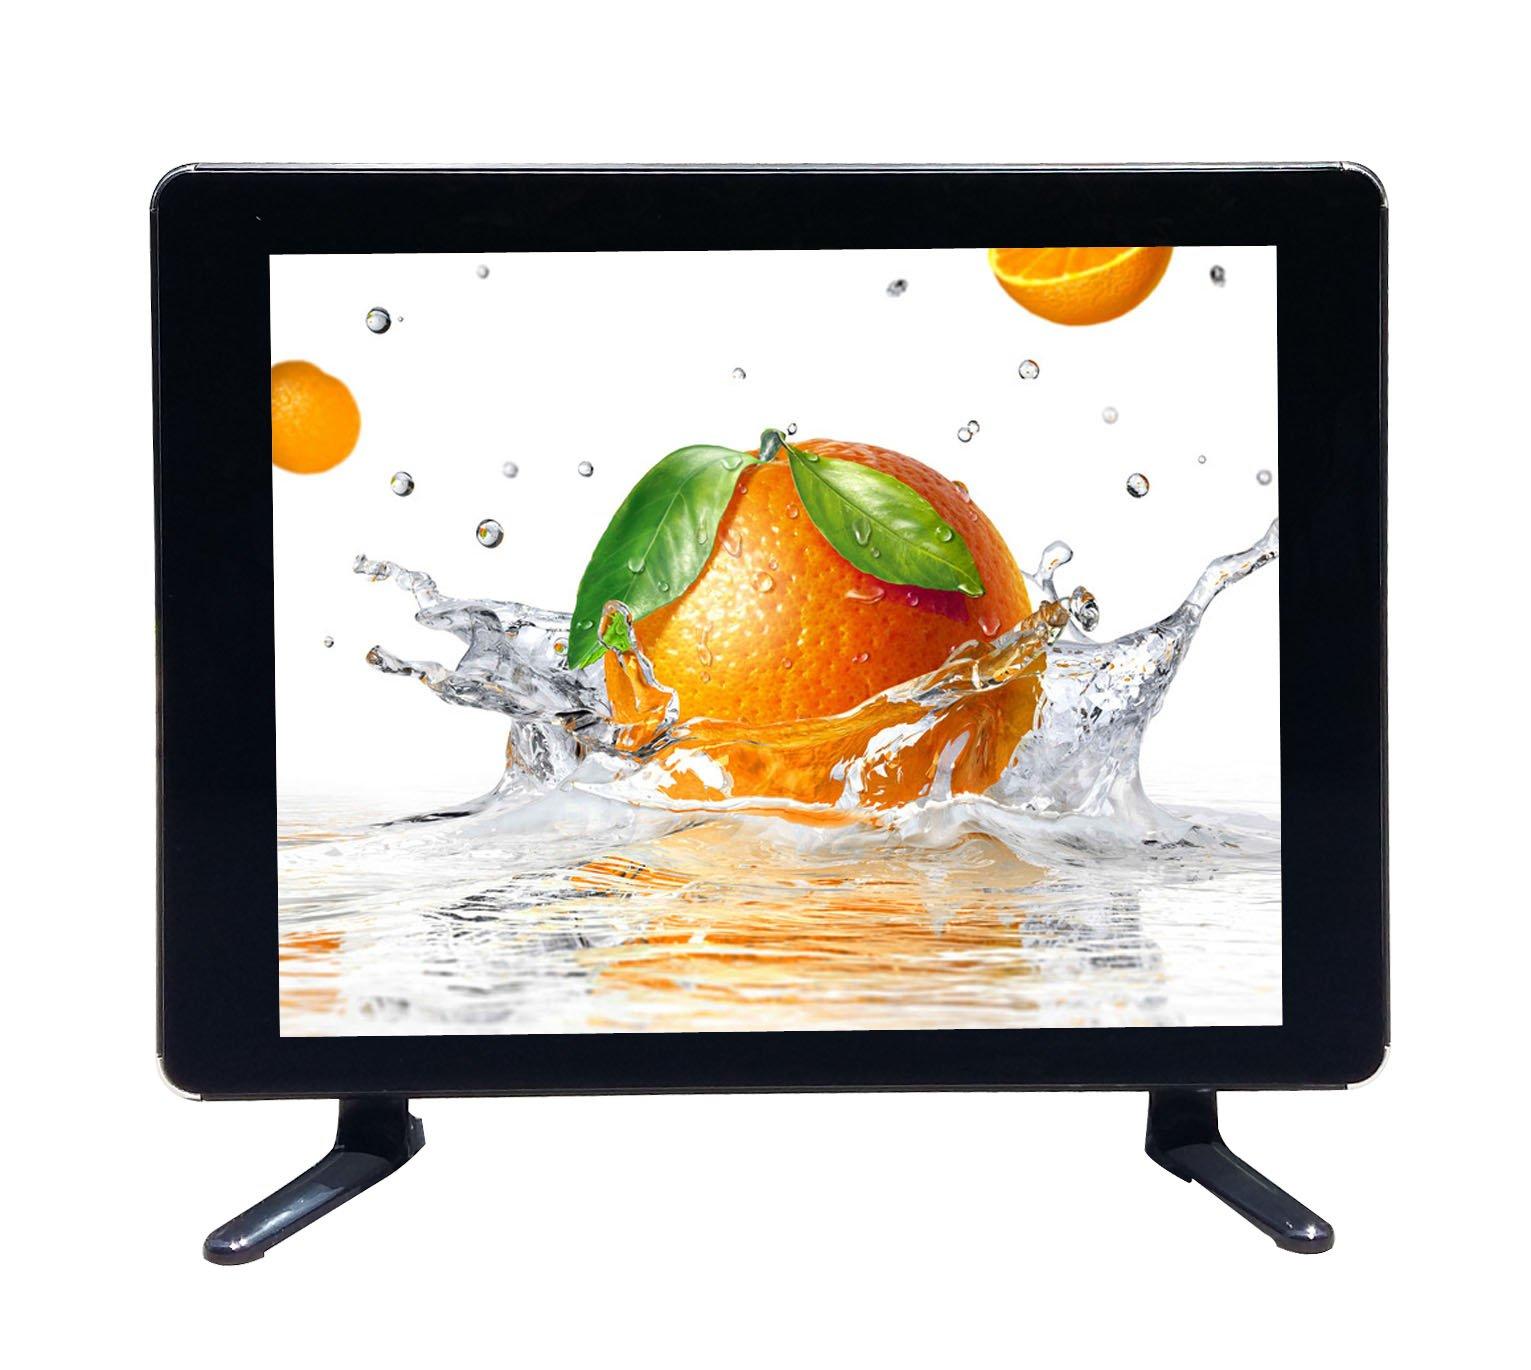 17 inch lcd tv price new style for tv screen